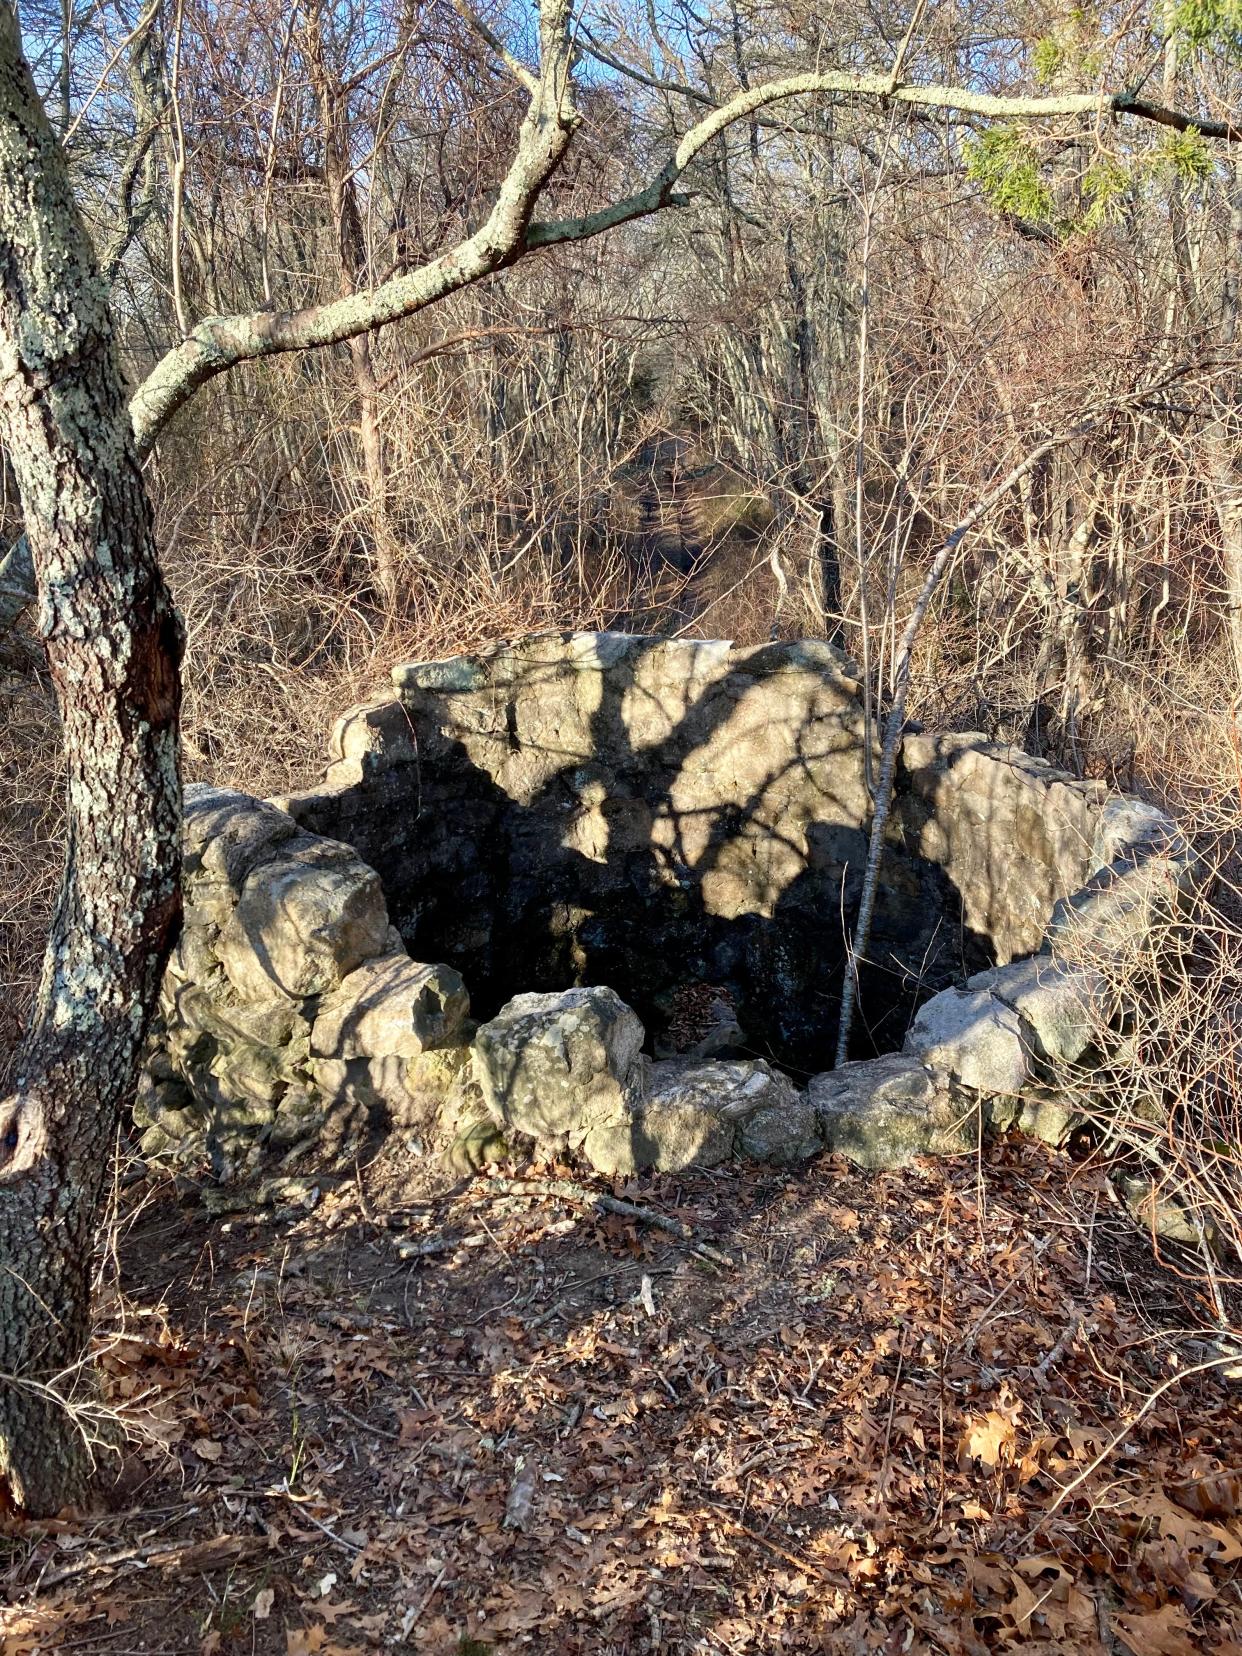 Dunham's Stone Structure in Westport. There will be a program at the Westport Free Public Library to help you identify some of Westport's USOs: unidentified stone objects.